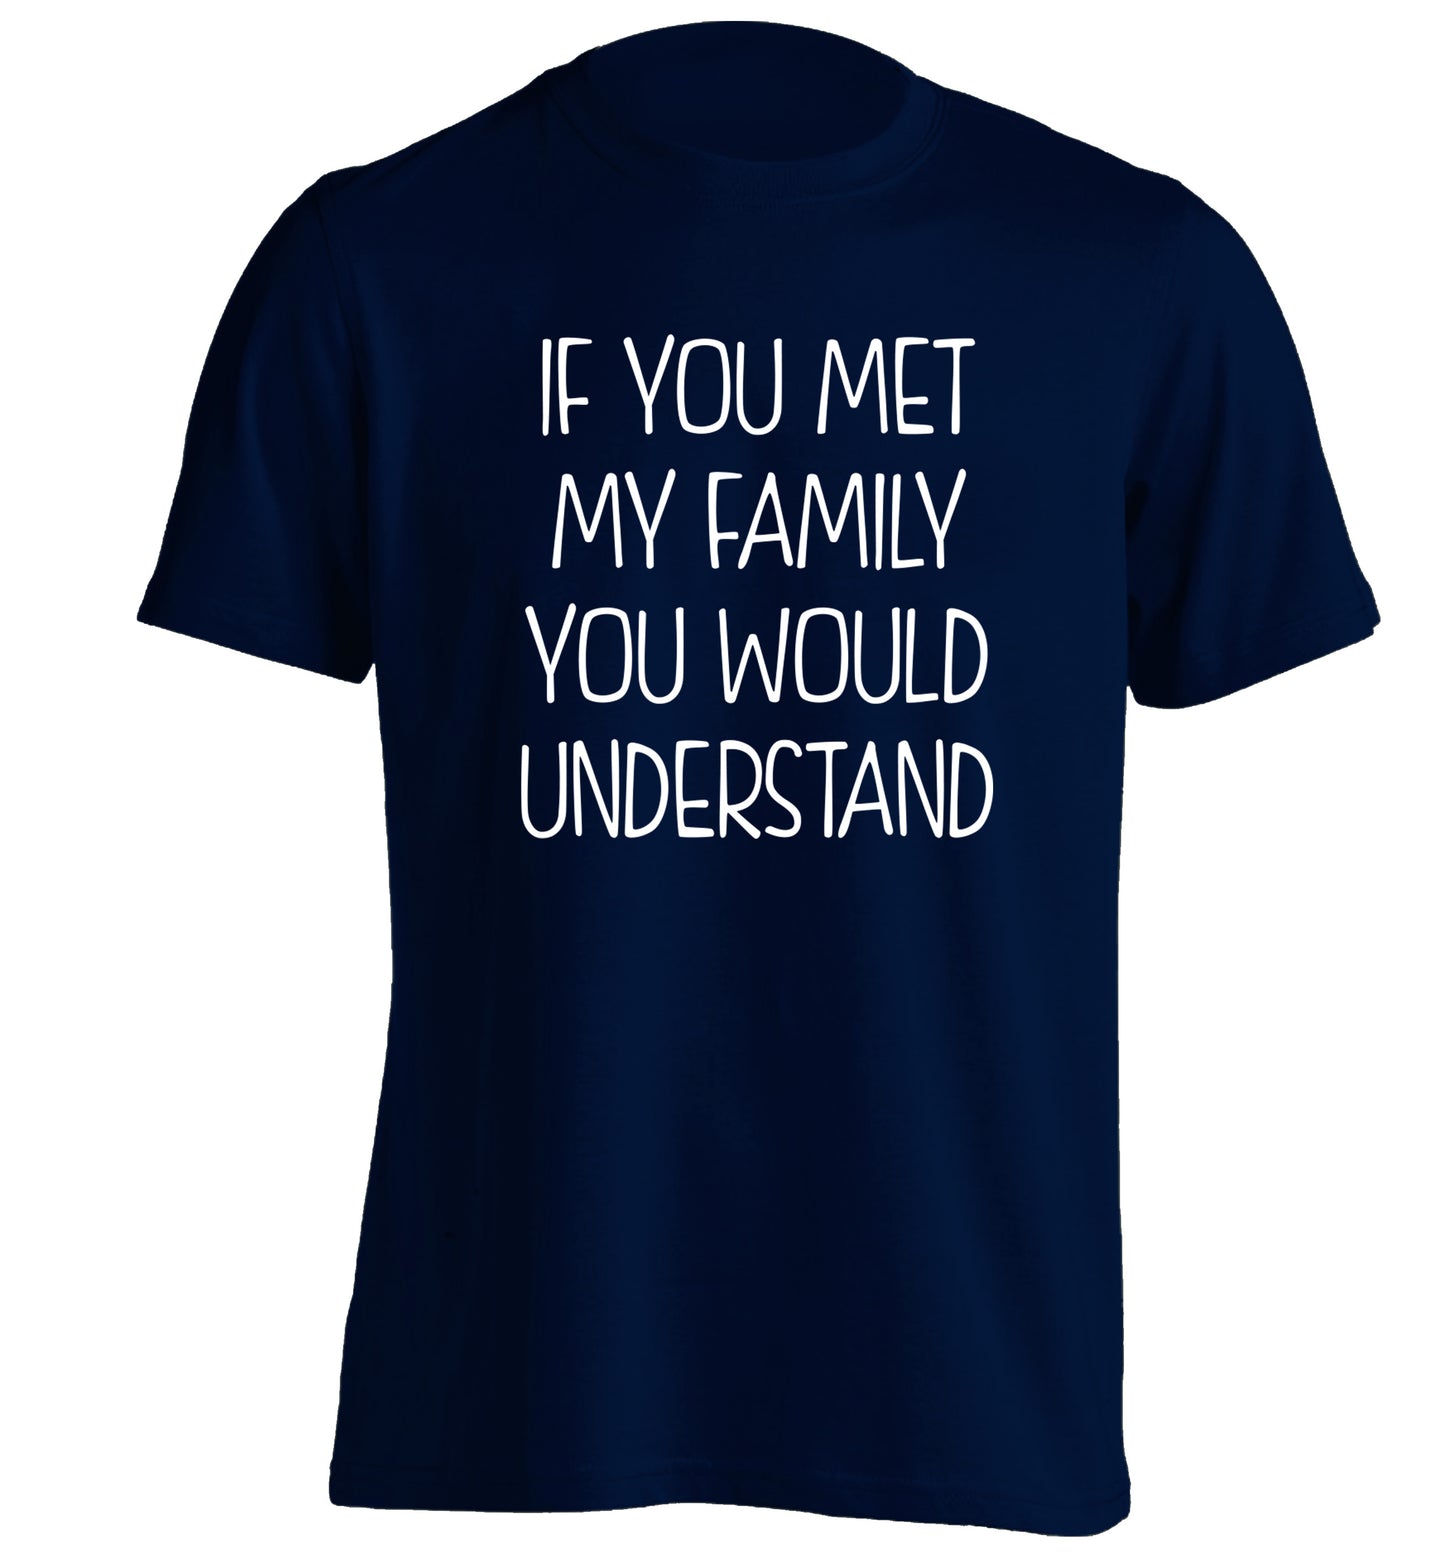 If you met my family you would understand adults unisex navy Tshirt 2XL